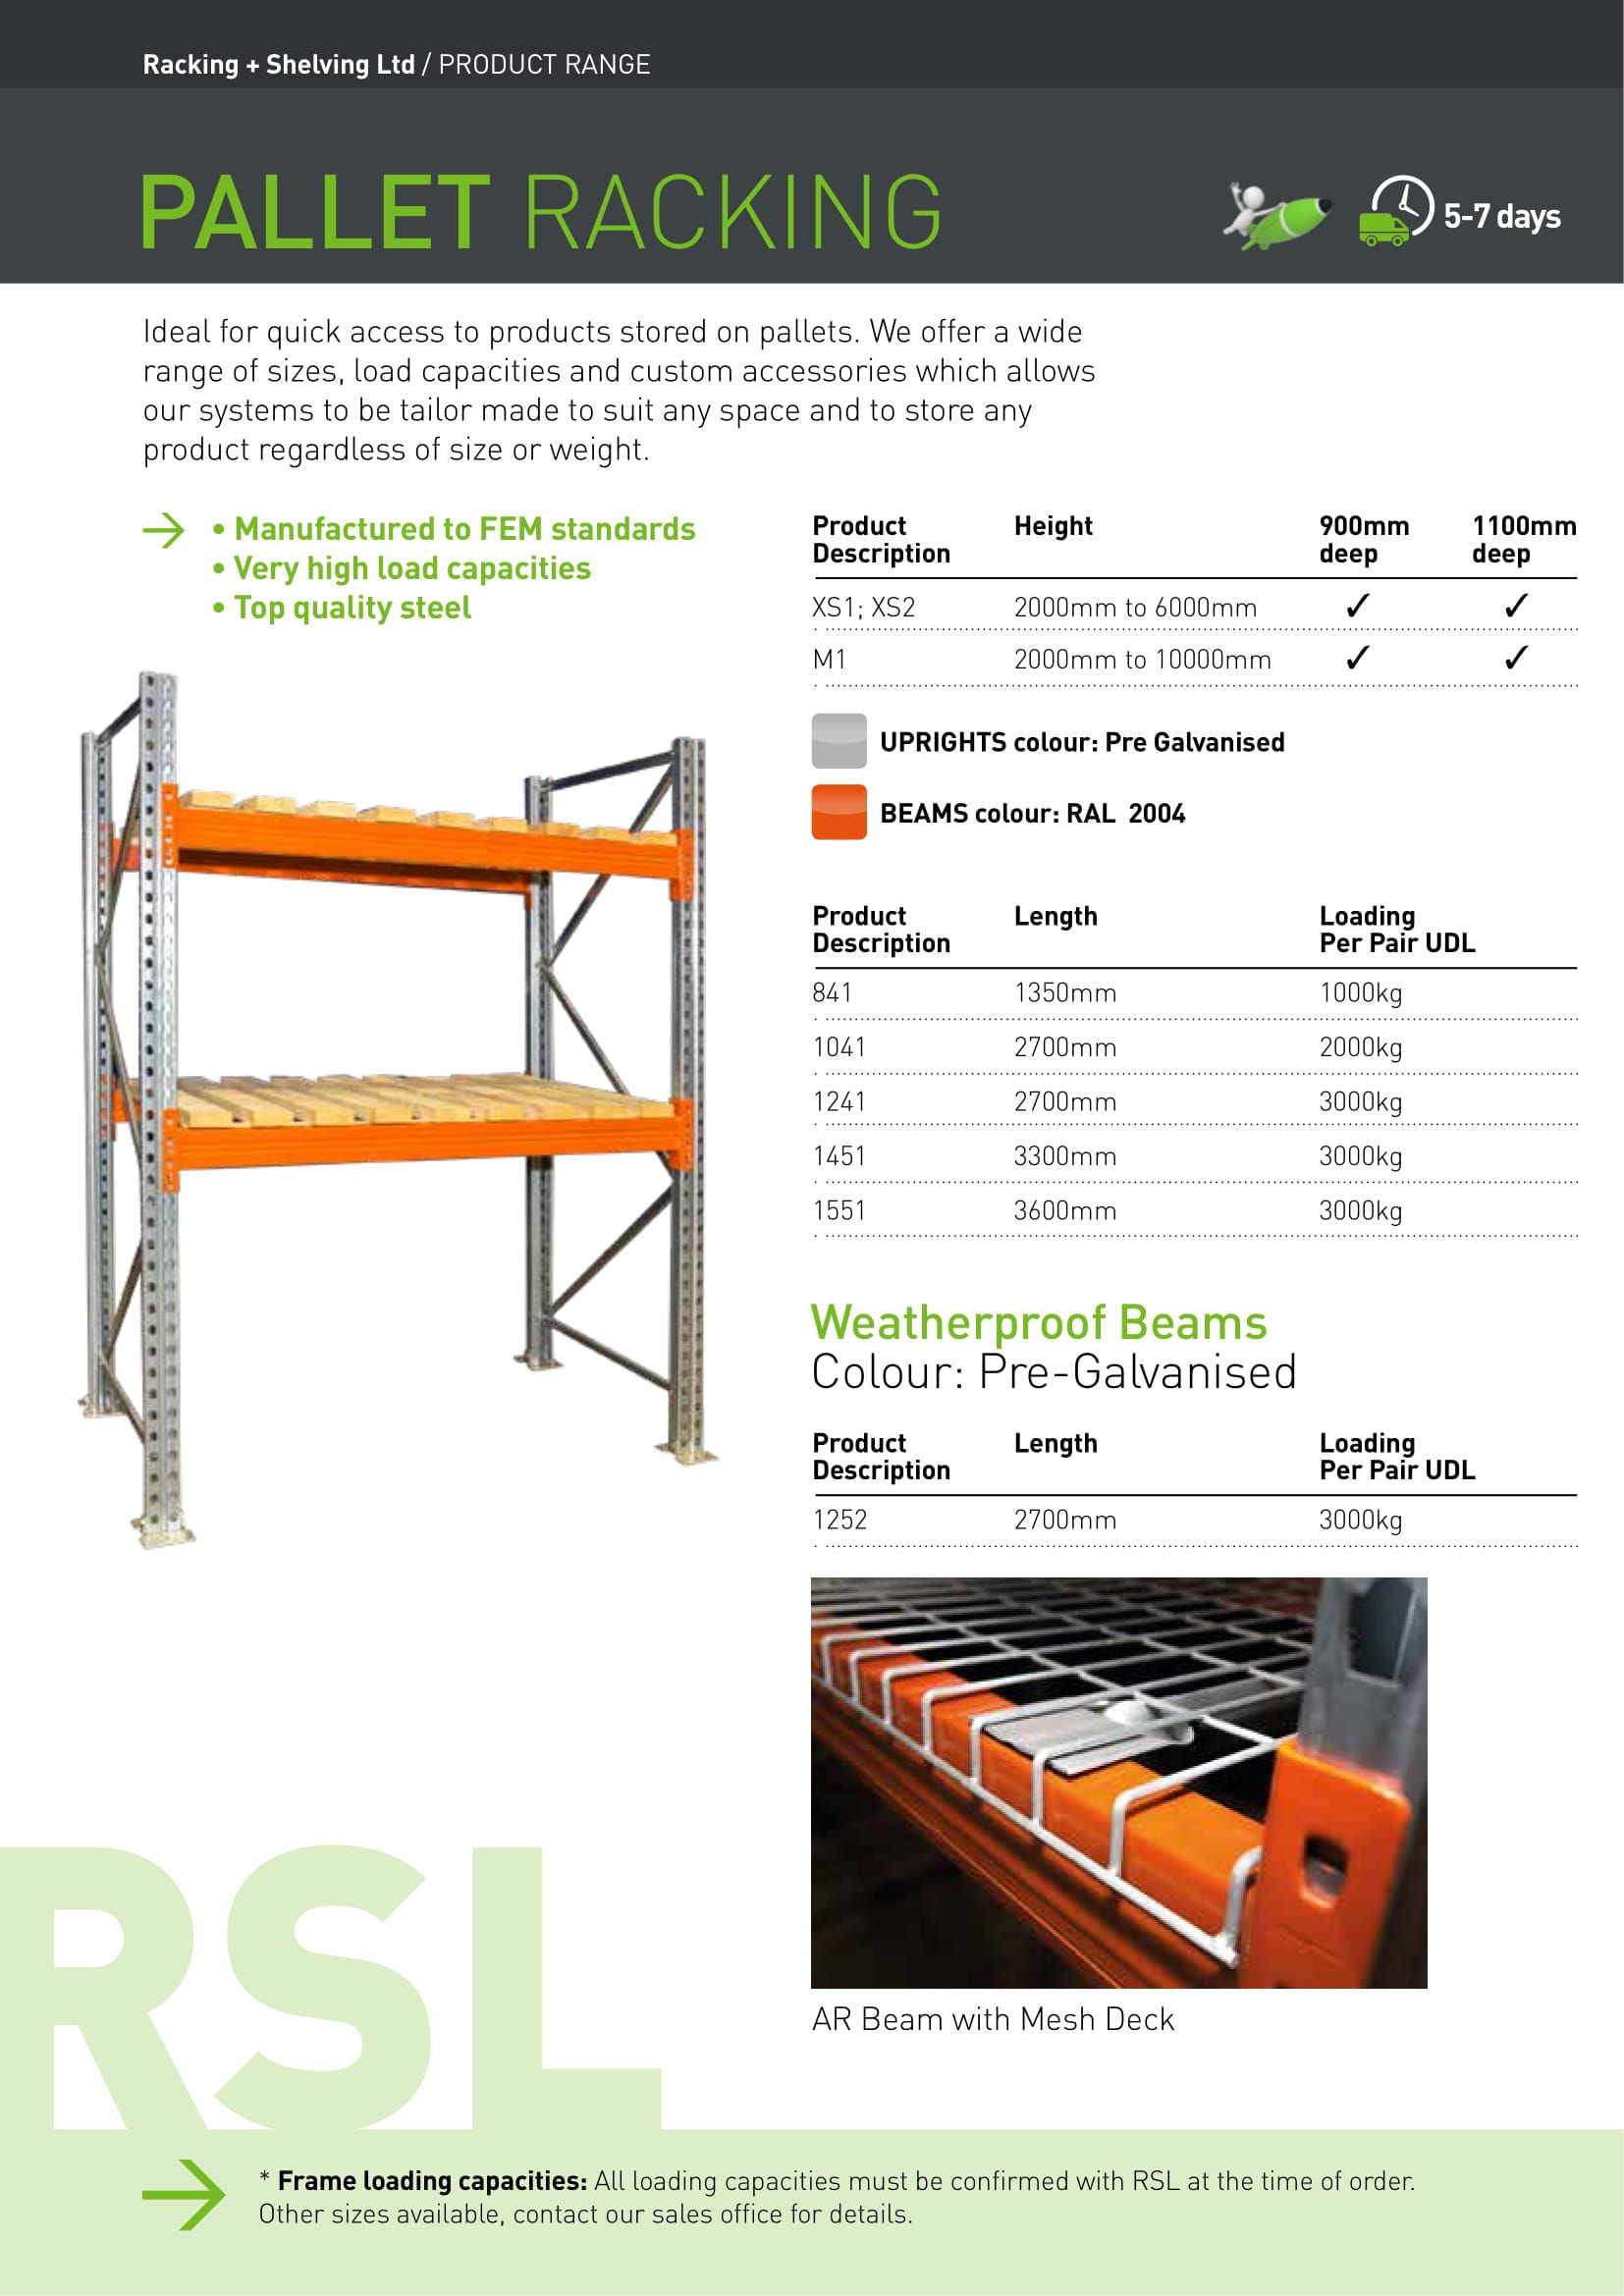 Pallet racking brochure page featuring images of pallet racks.